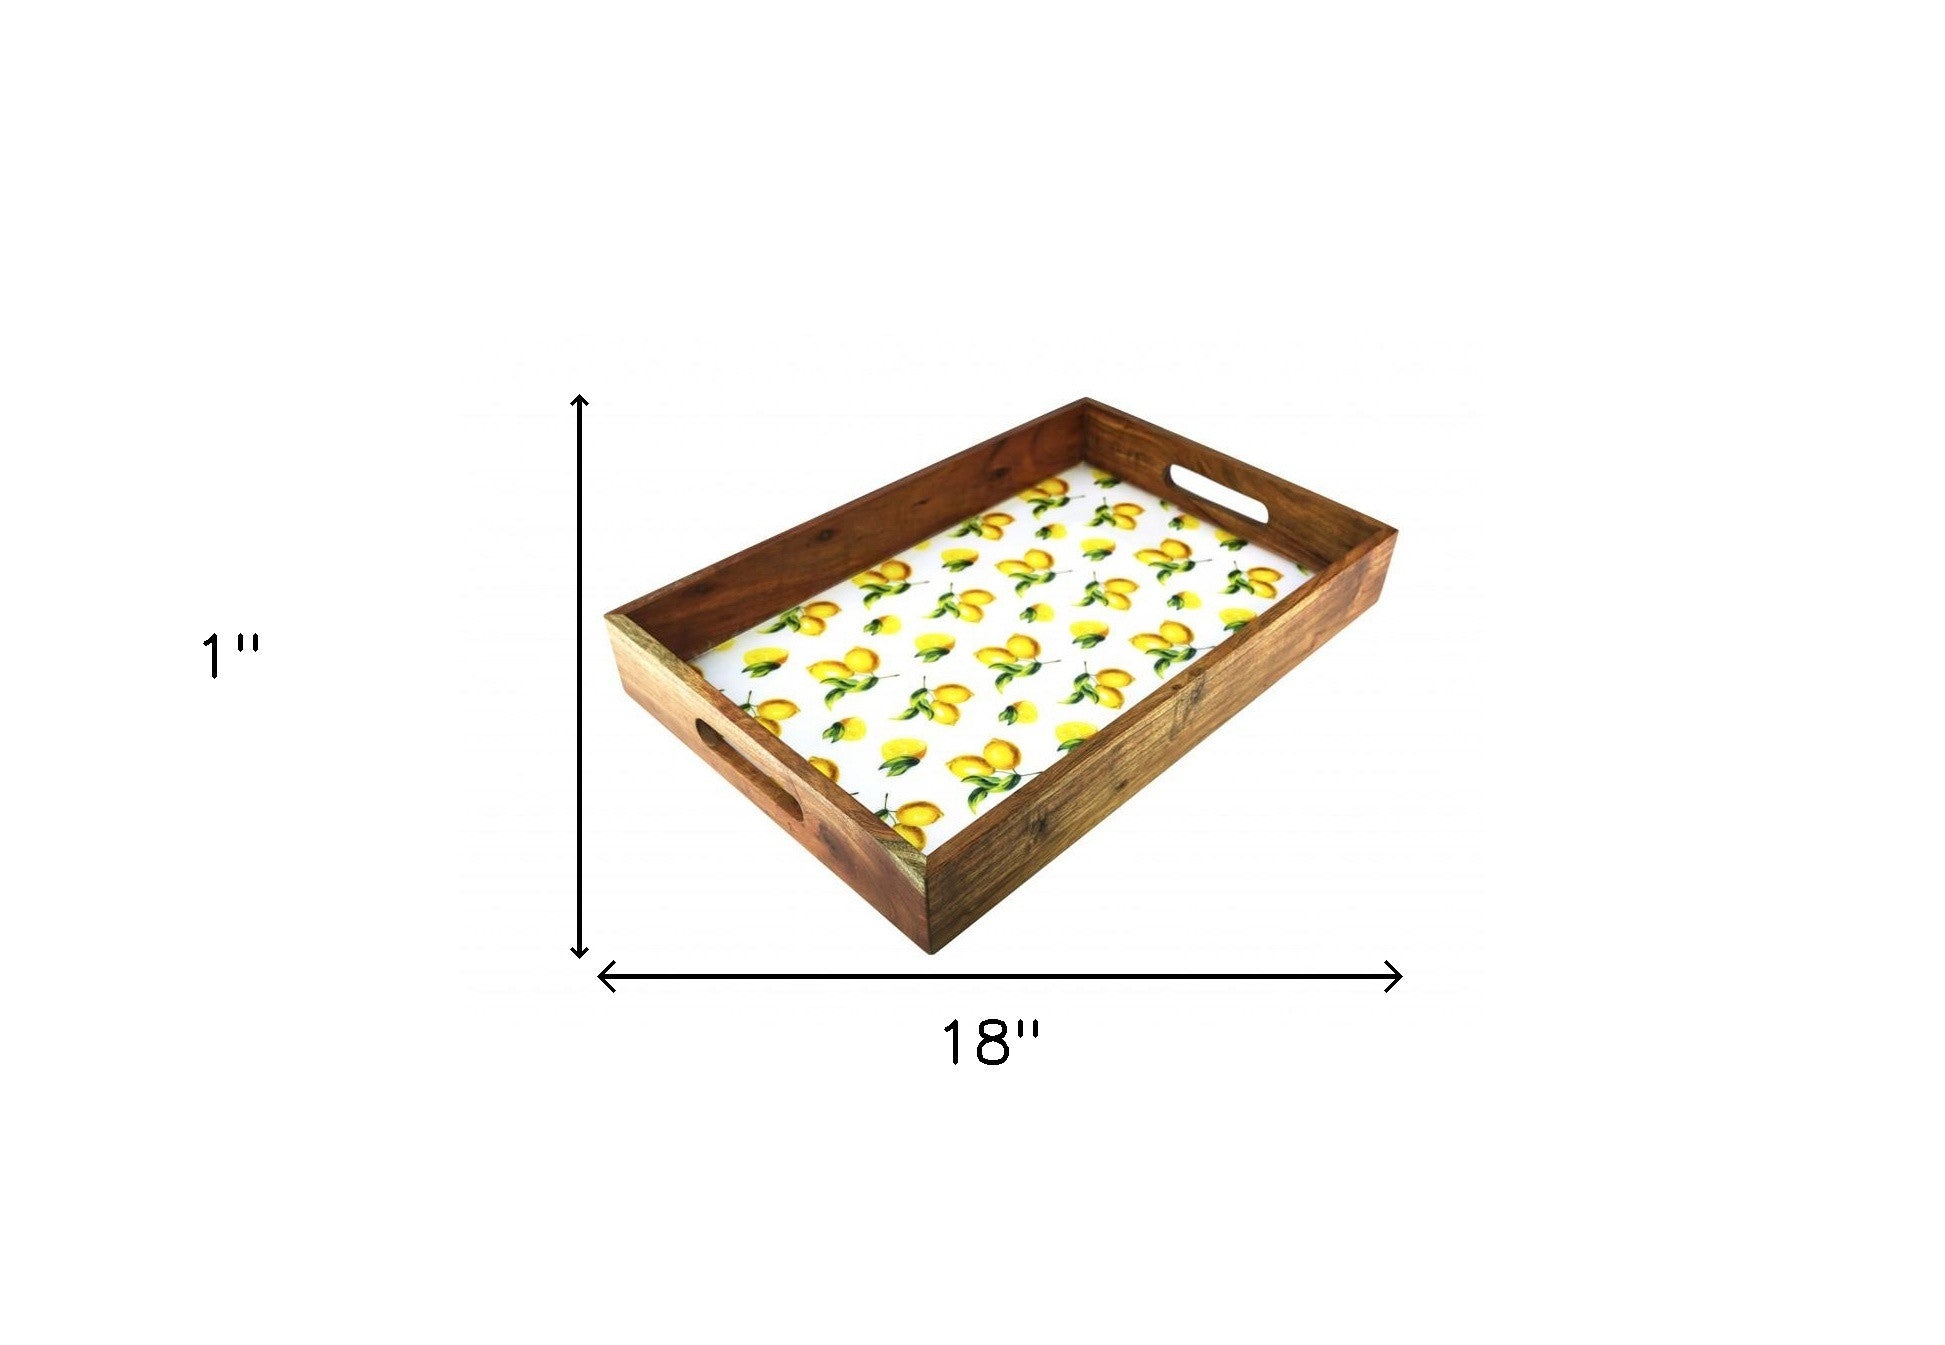 18" Brown and White Solid Wood Lemon Serving Tray With Handles